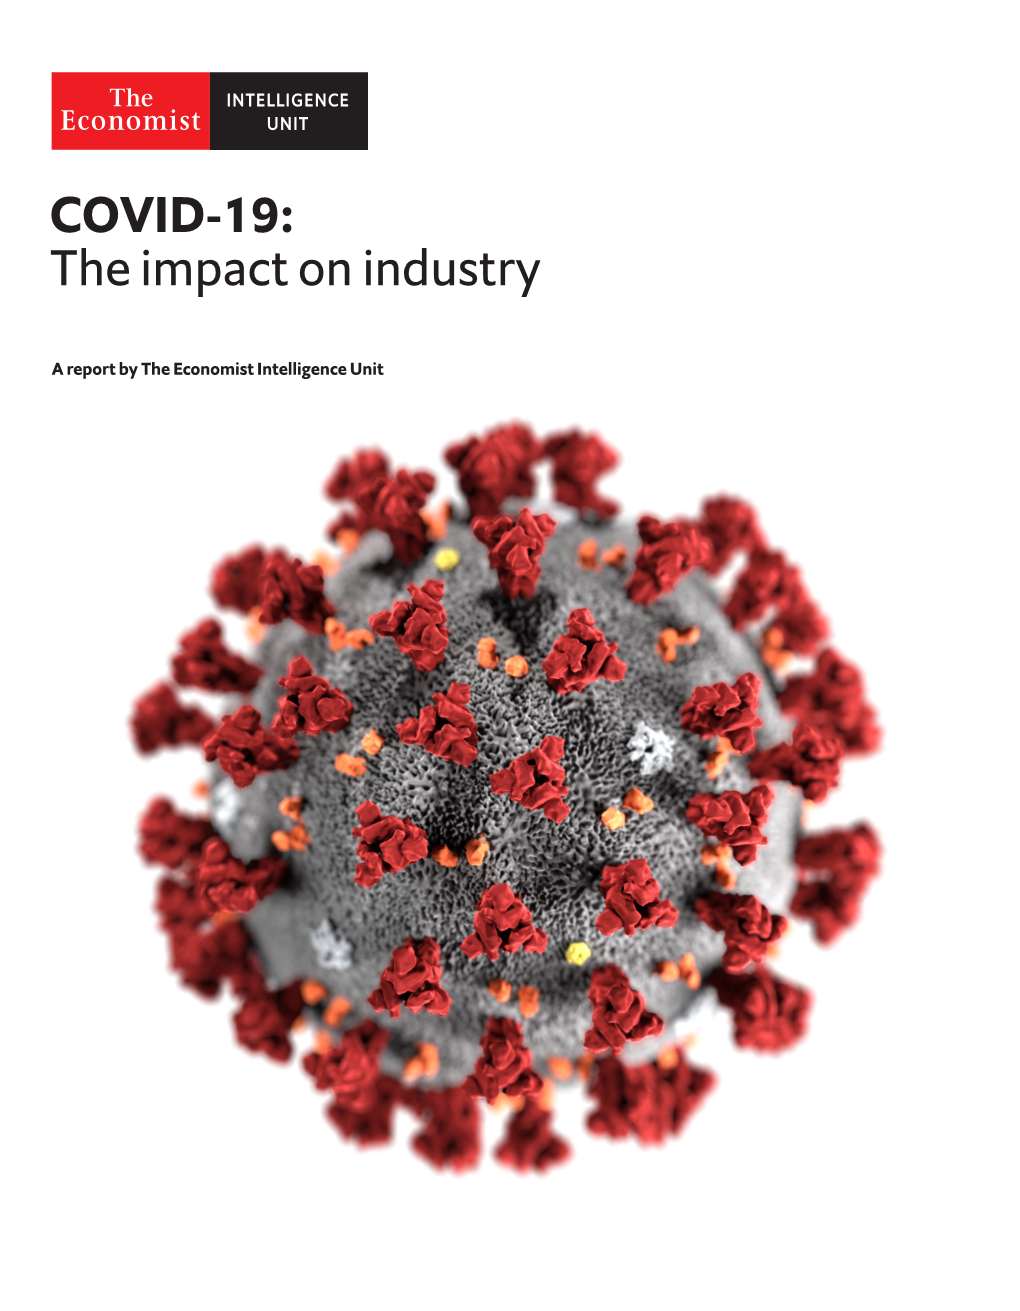 COVID-19: the Impact on Industry